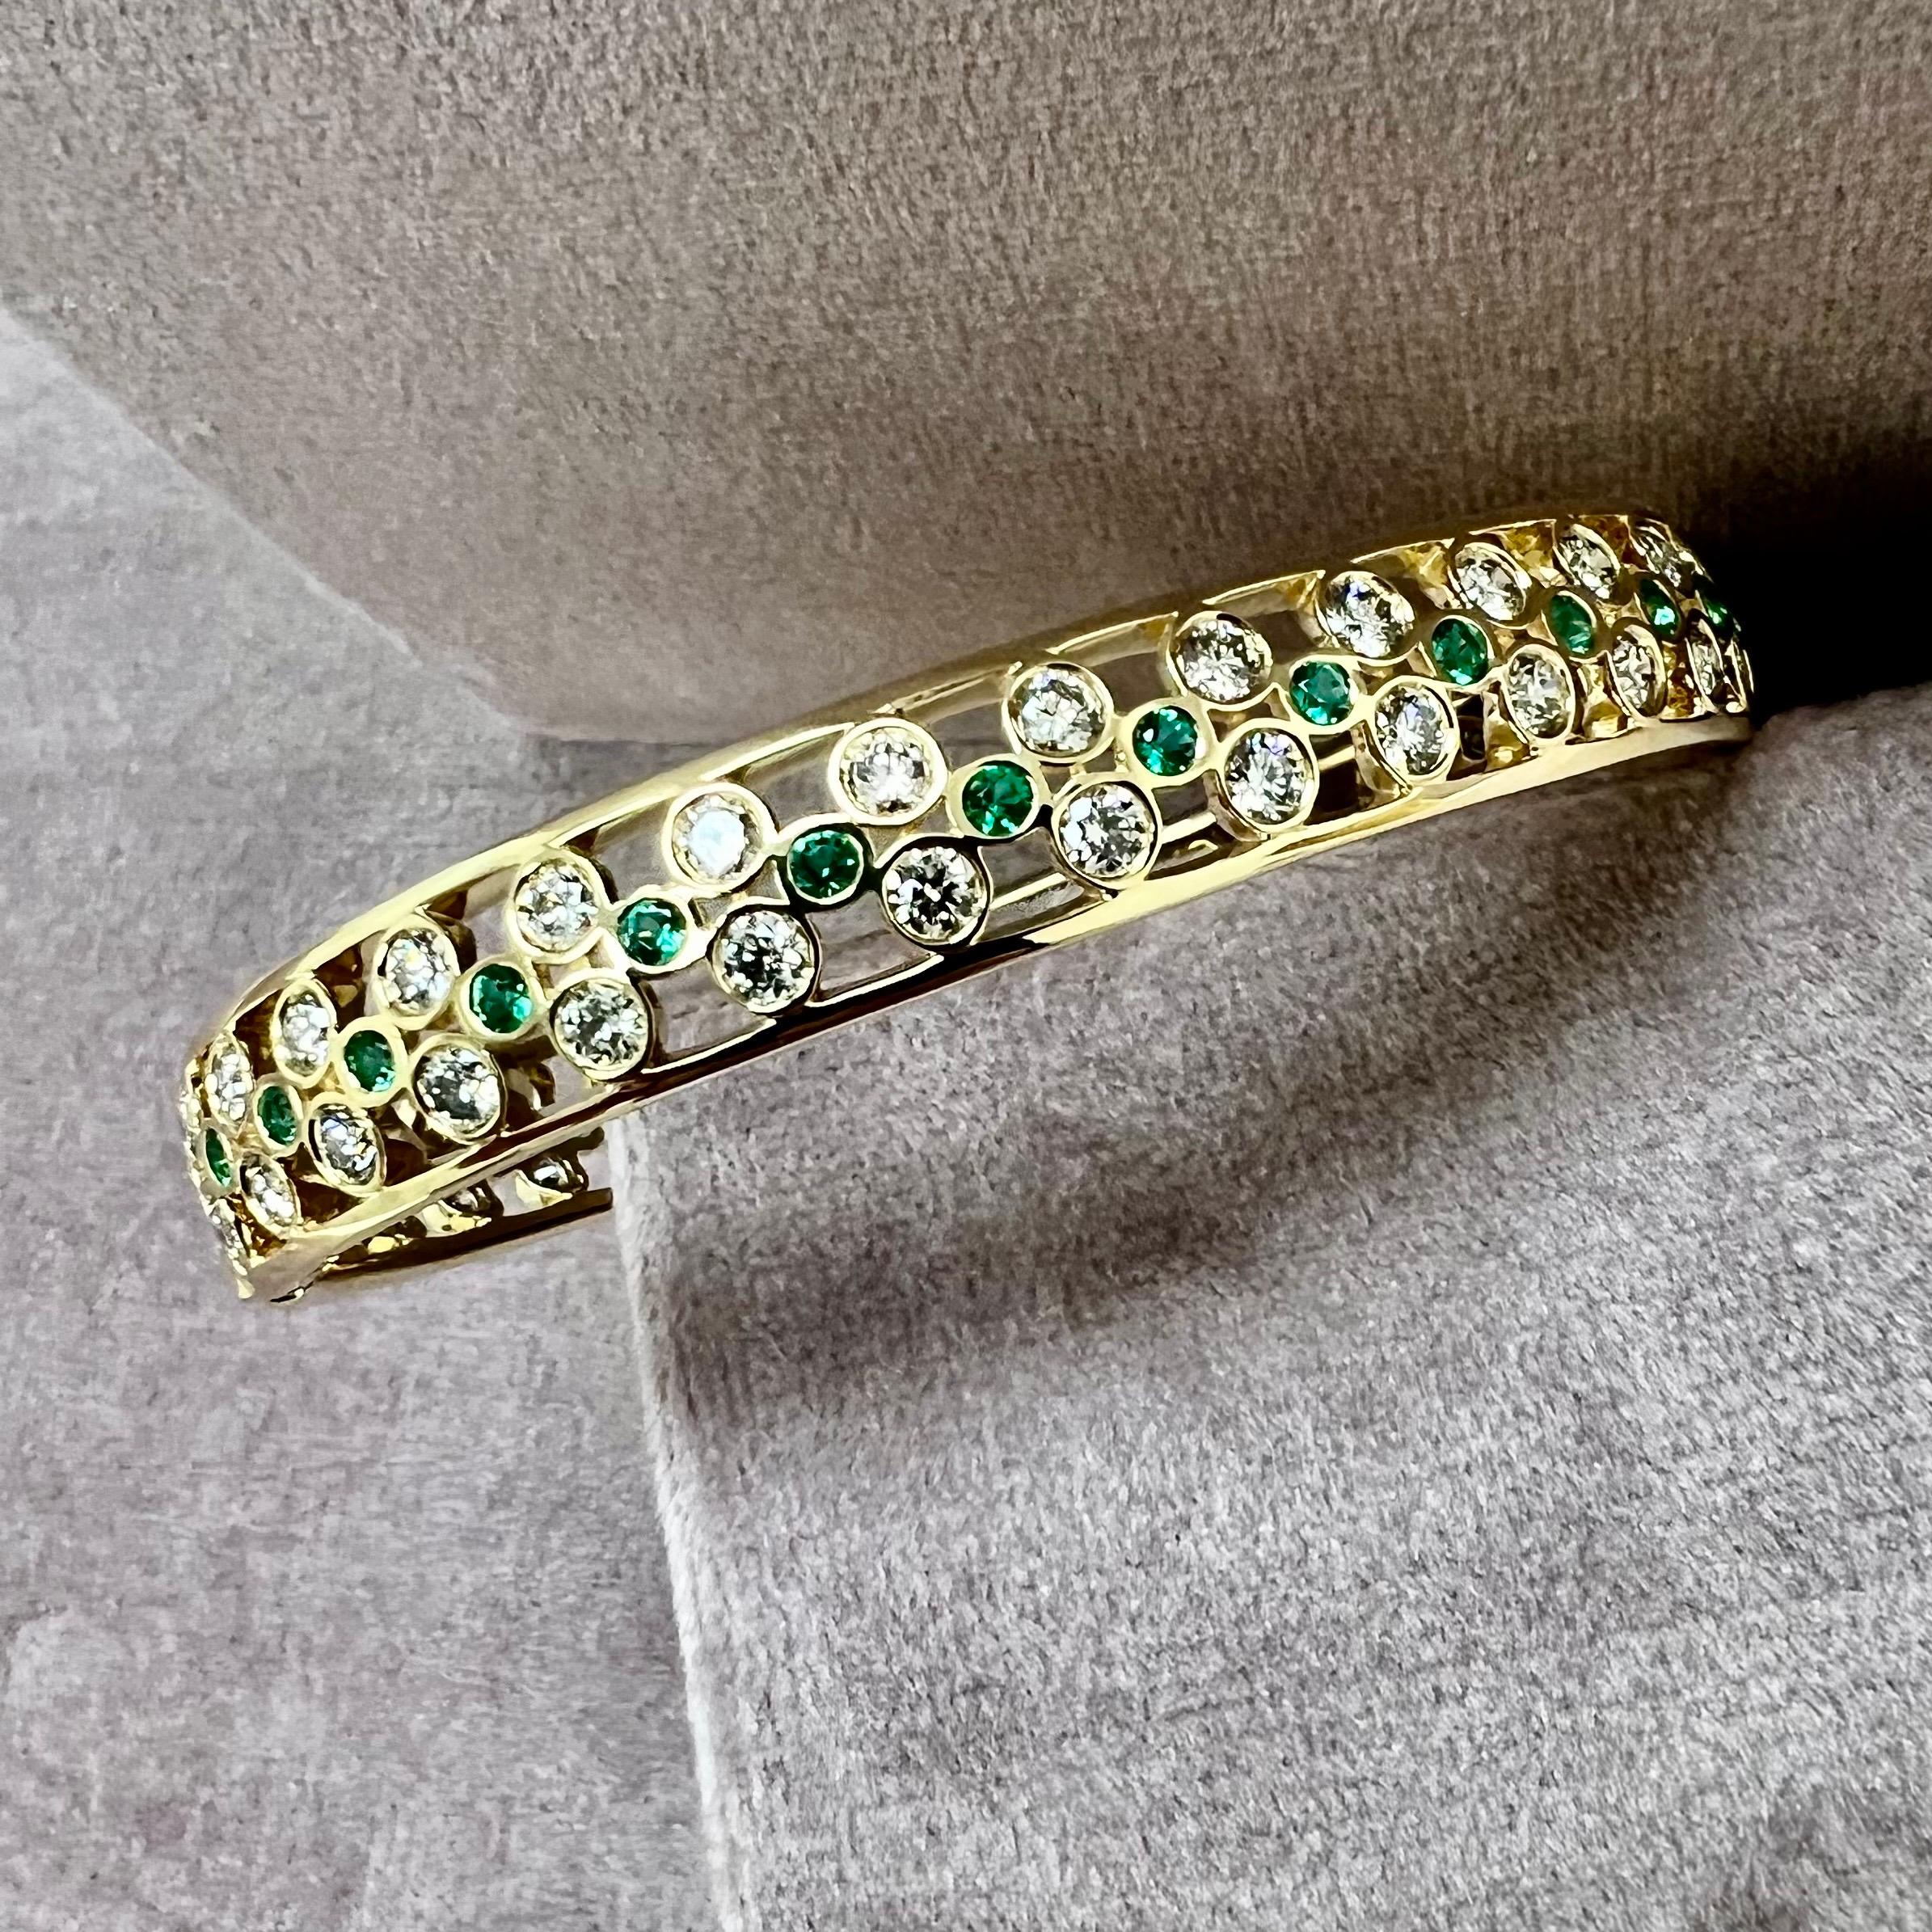 Created in 18 karat yellow gold
Emeralds 0.90 carat approx.
Diamonds 4.40 carats approx.
Openable oval bracelet


About the Designers ~ Dharmesh & Namrata

Drawing inspiration from little things, Dharmesh & Namrata Kothari have created an